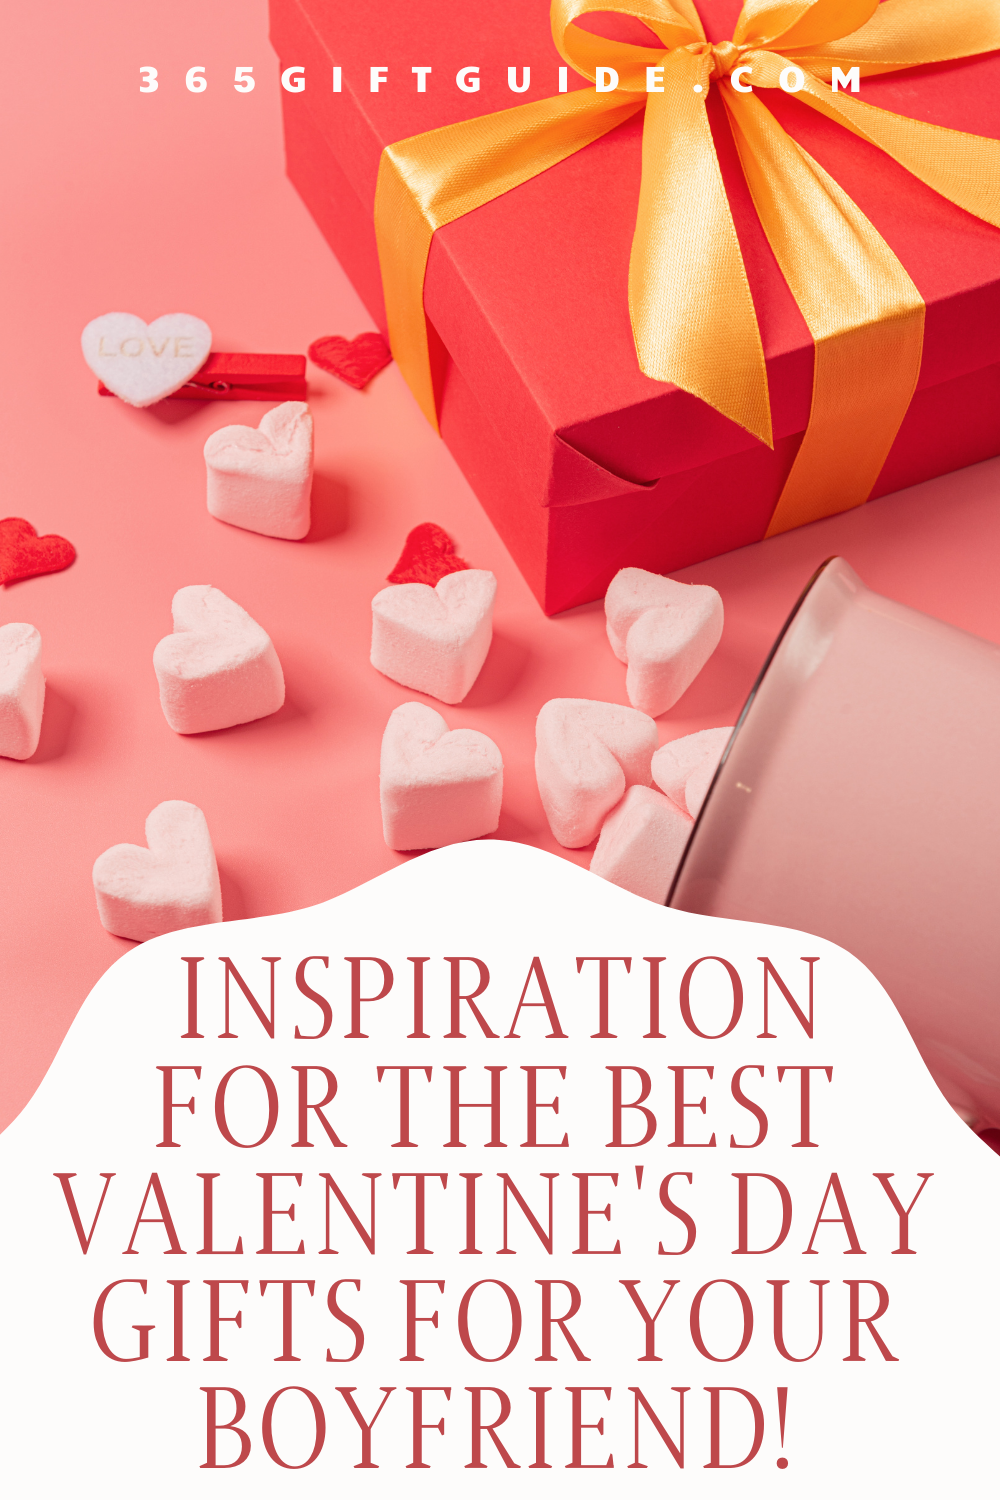 Can't decide what to get your man for valentine's day? Here's some great inspiration